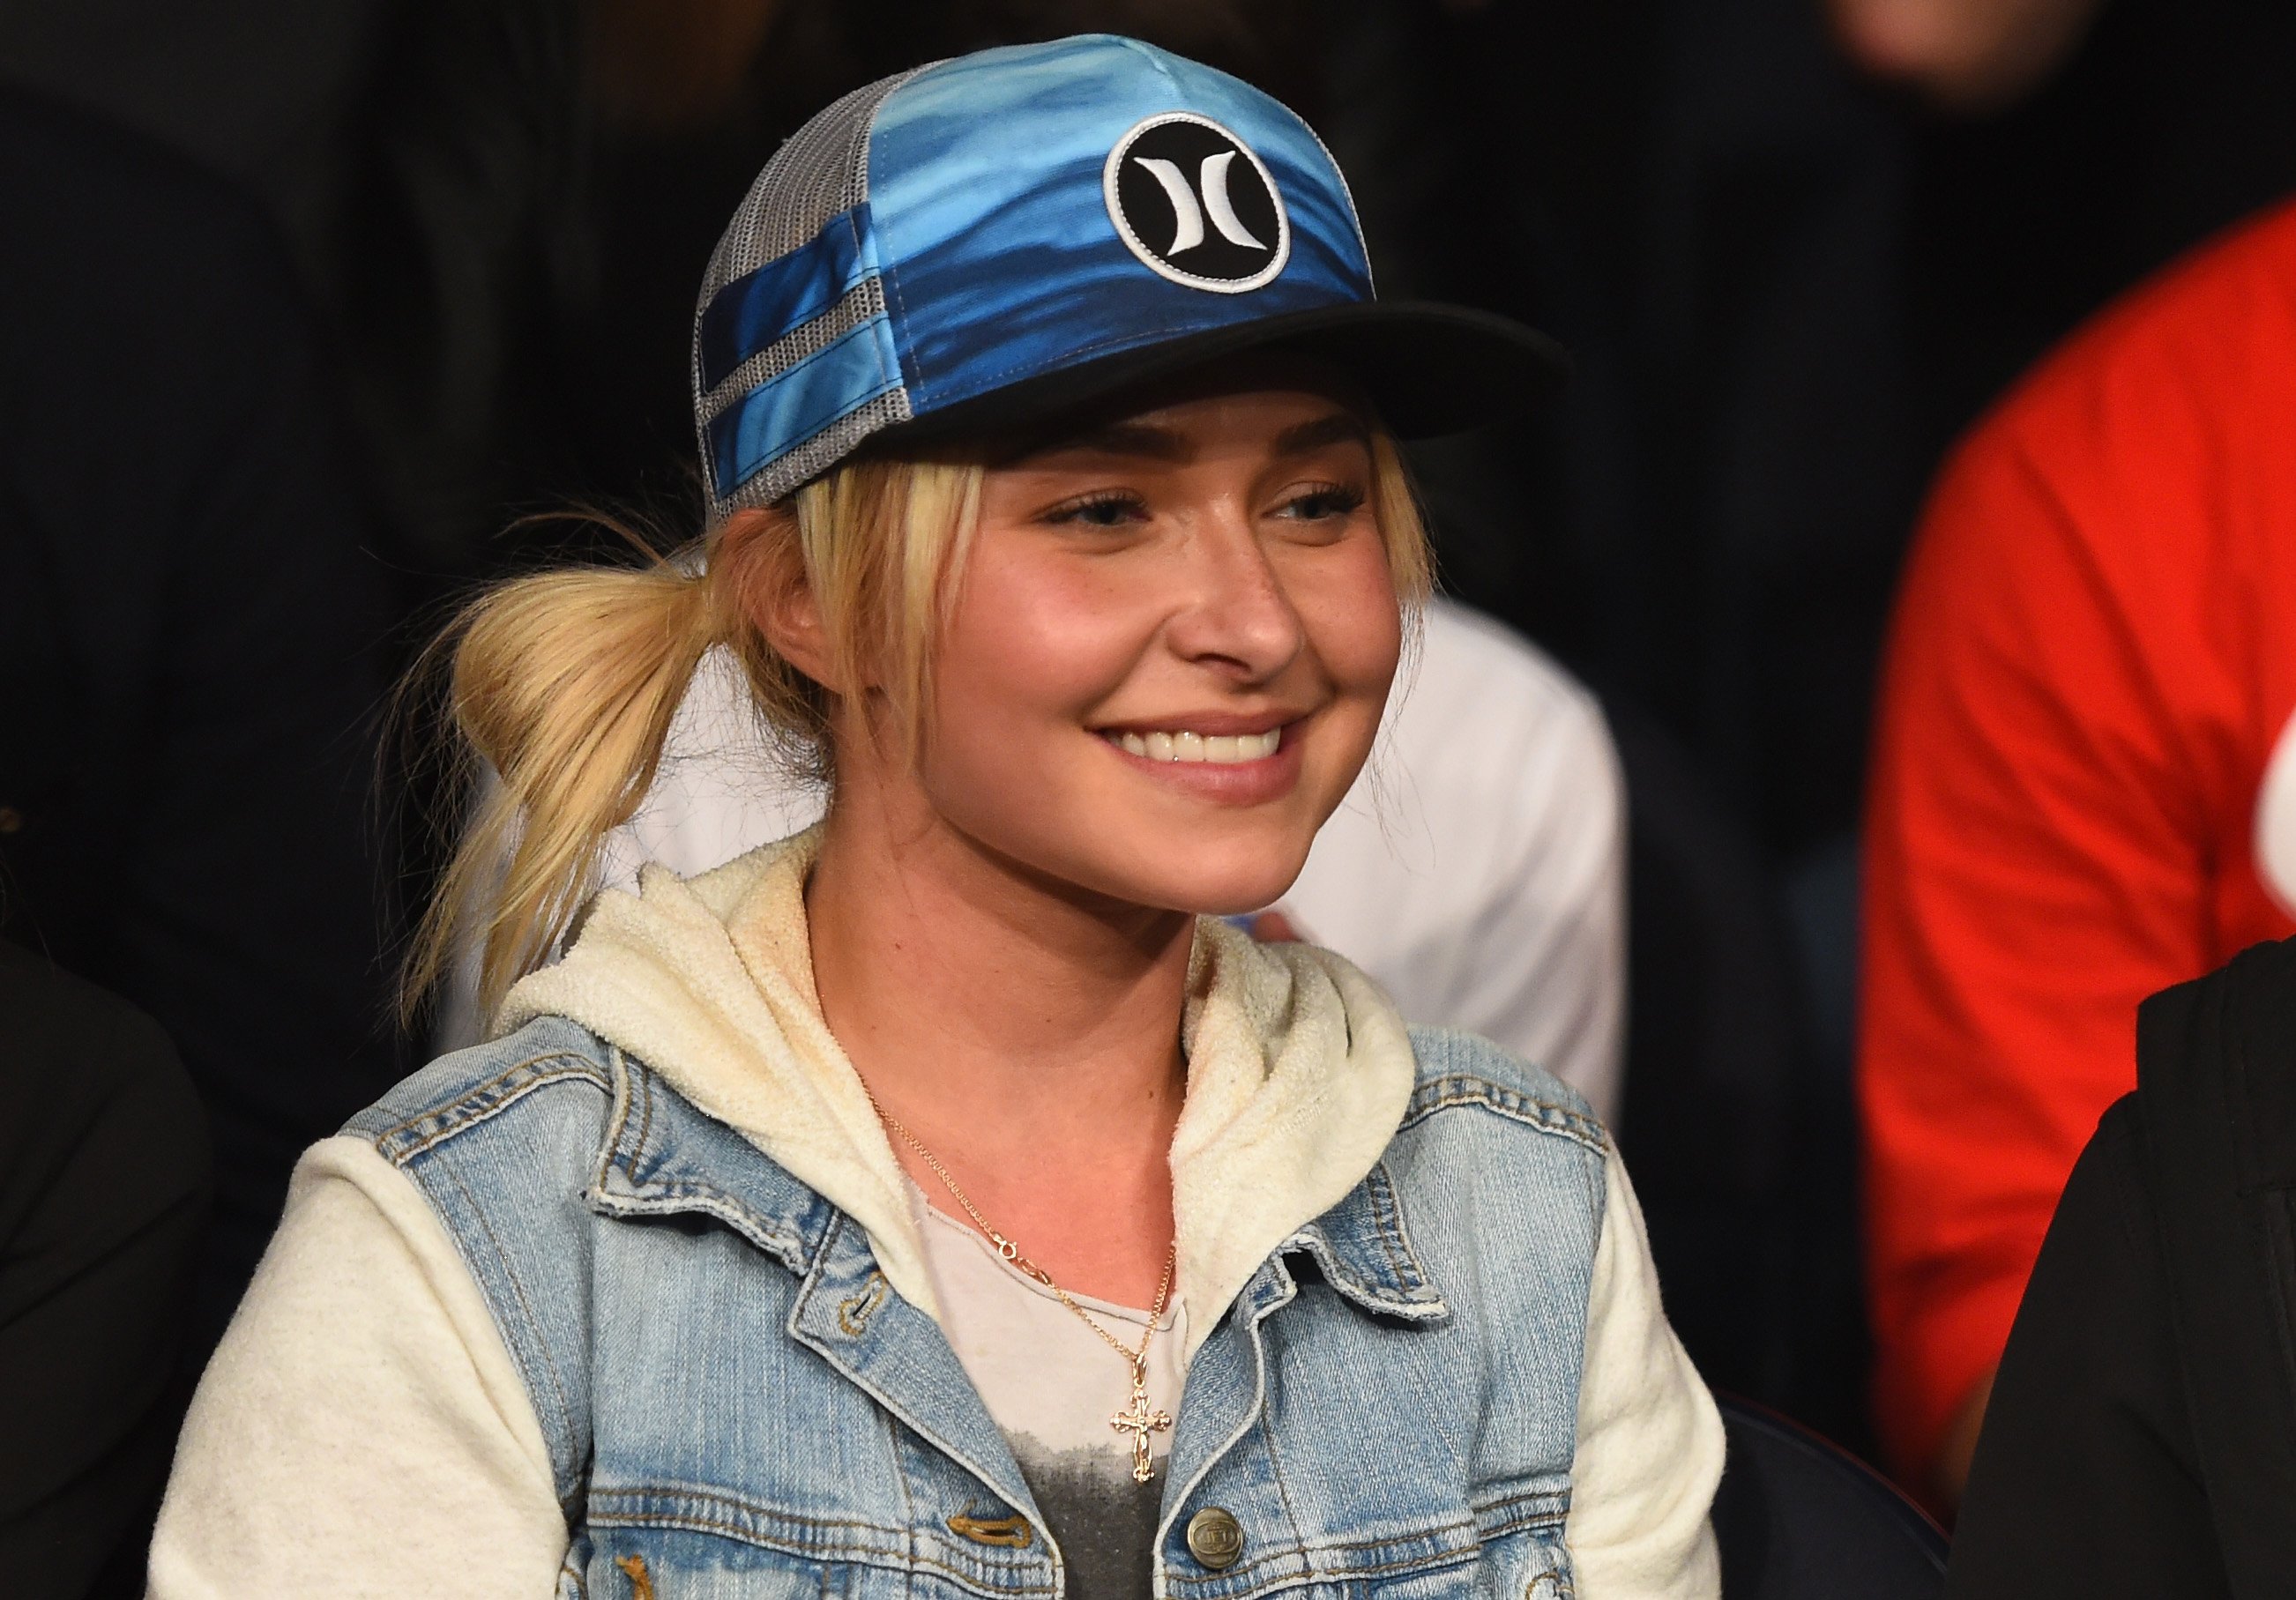 Actor Hayden Panettiere wears a ballcap and cream-colored hoodie in this photograph.